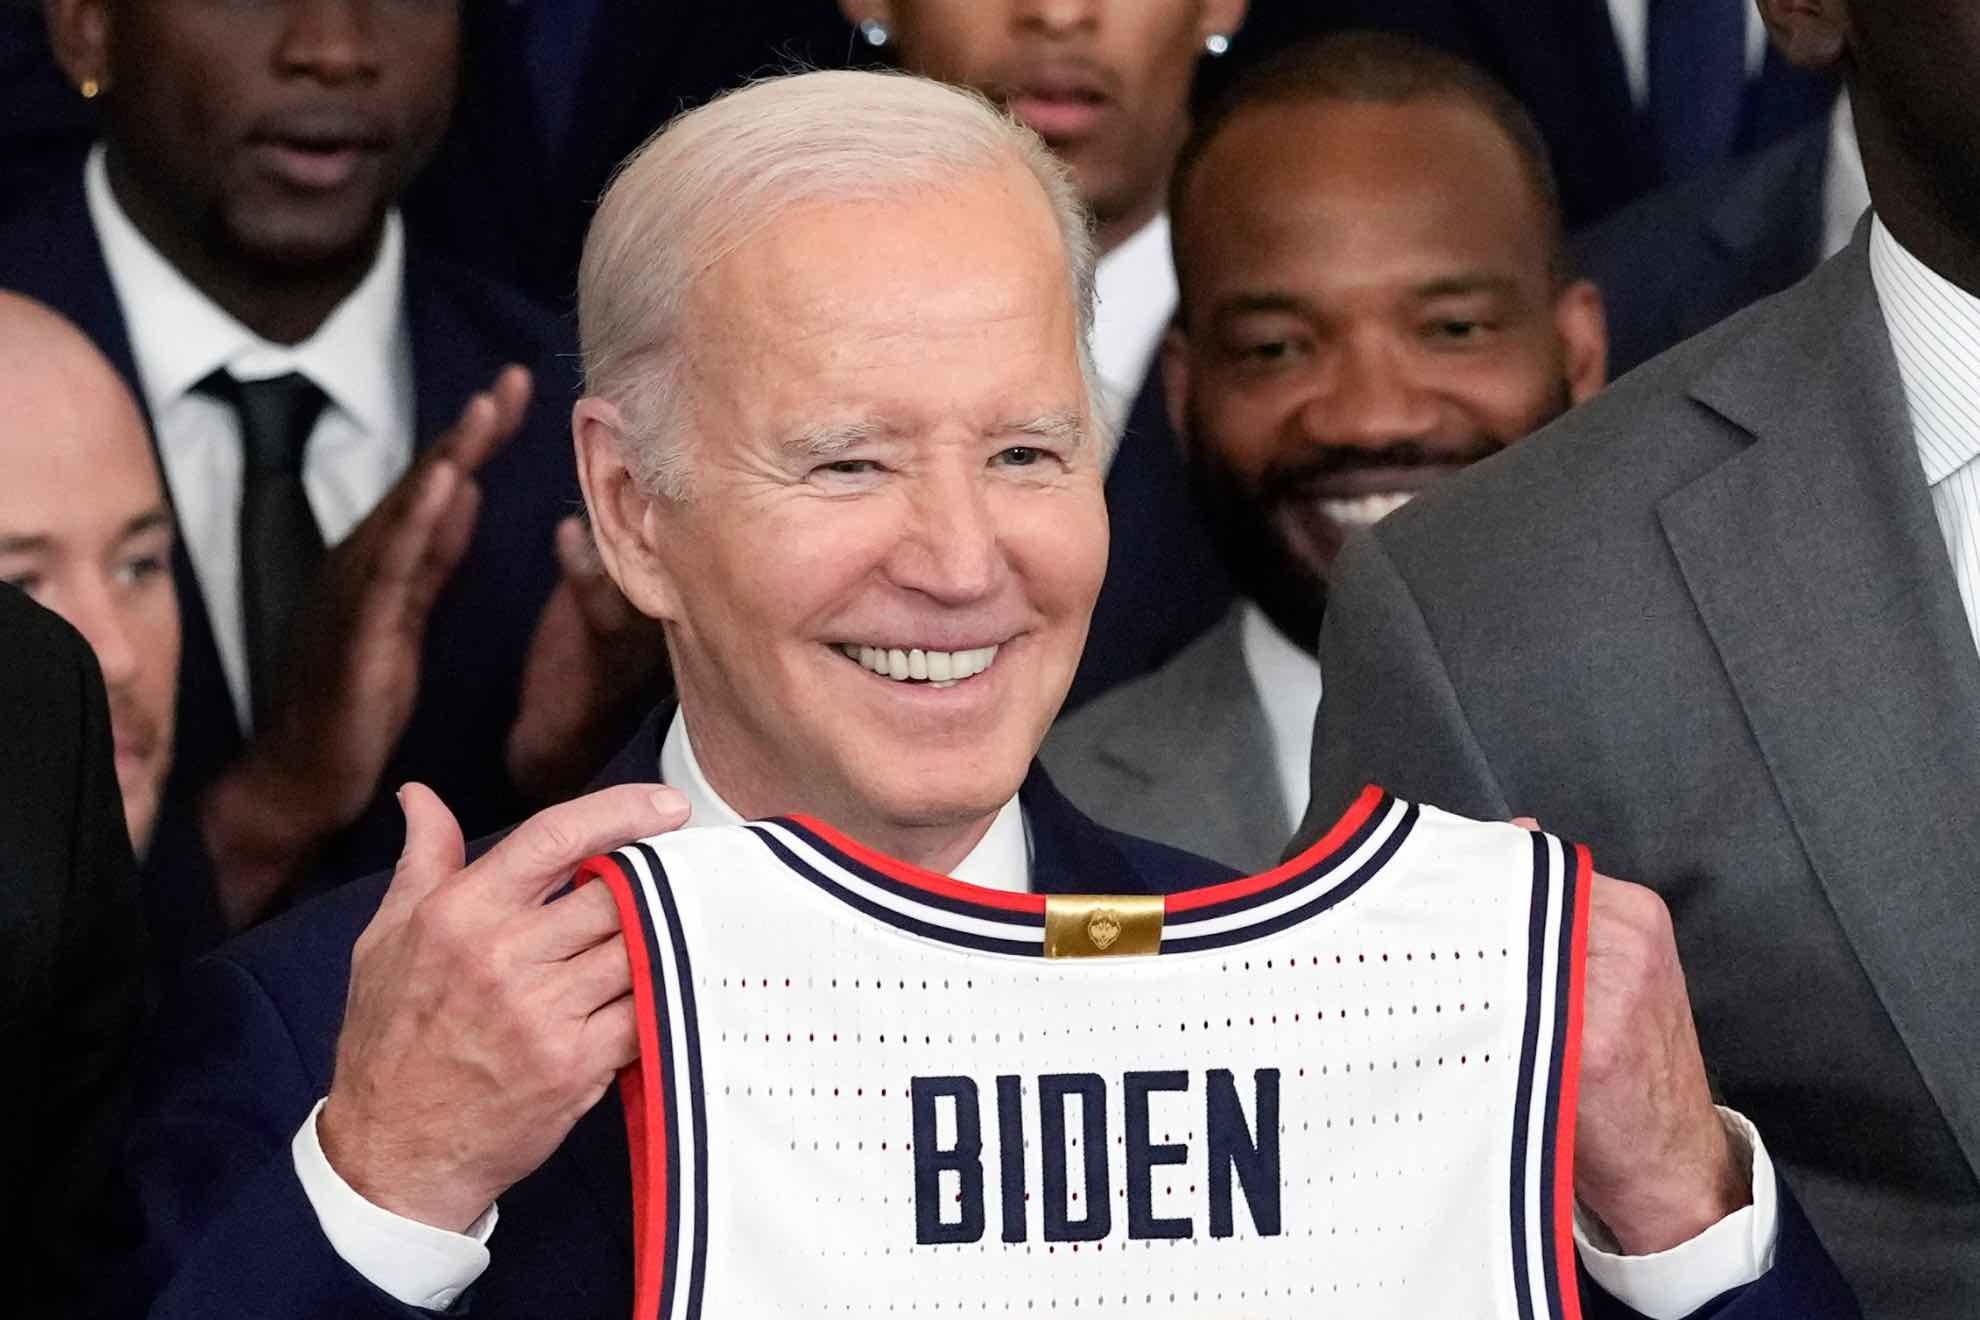 President of the United States Joe Biden welcomed the UConn Huskies to the White House